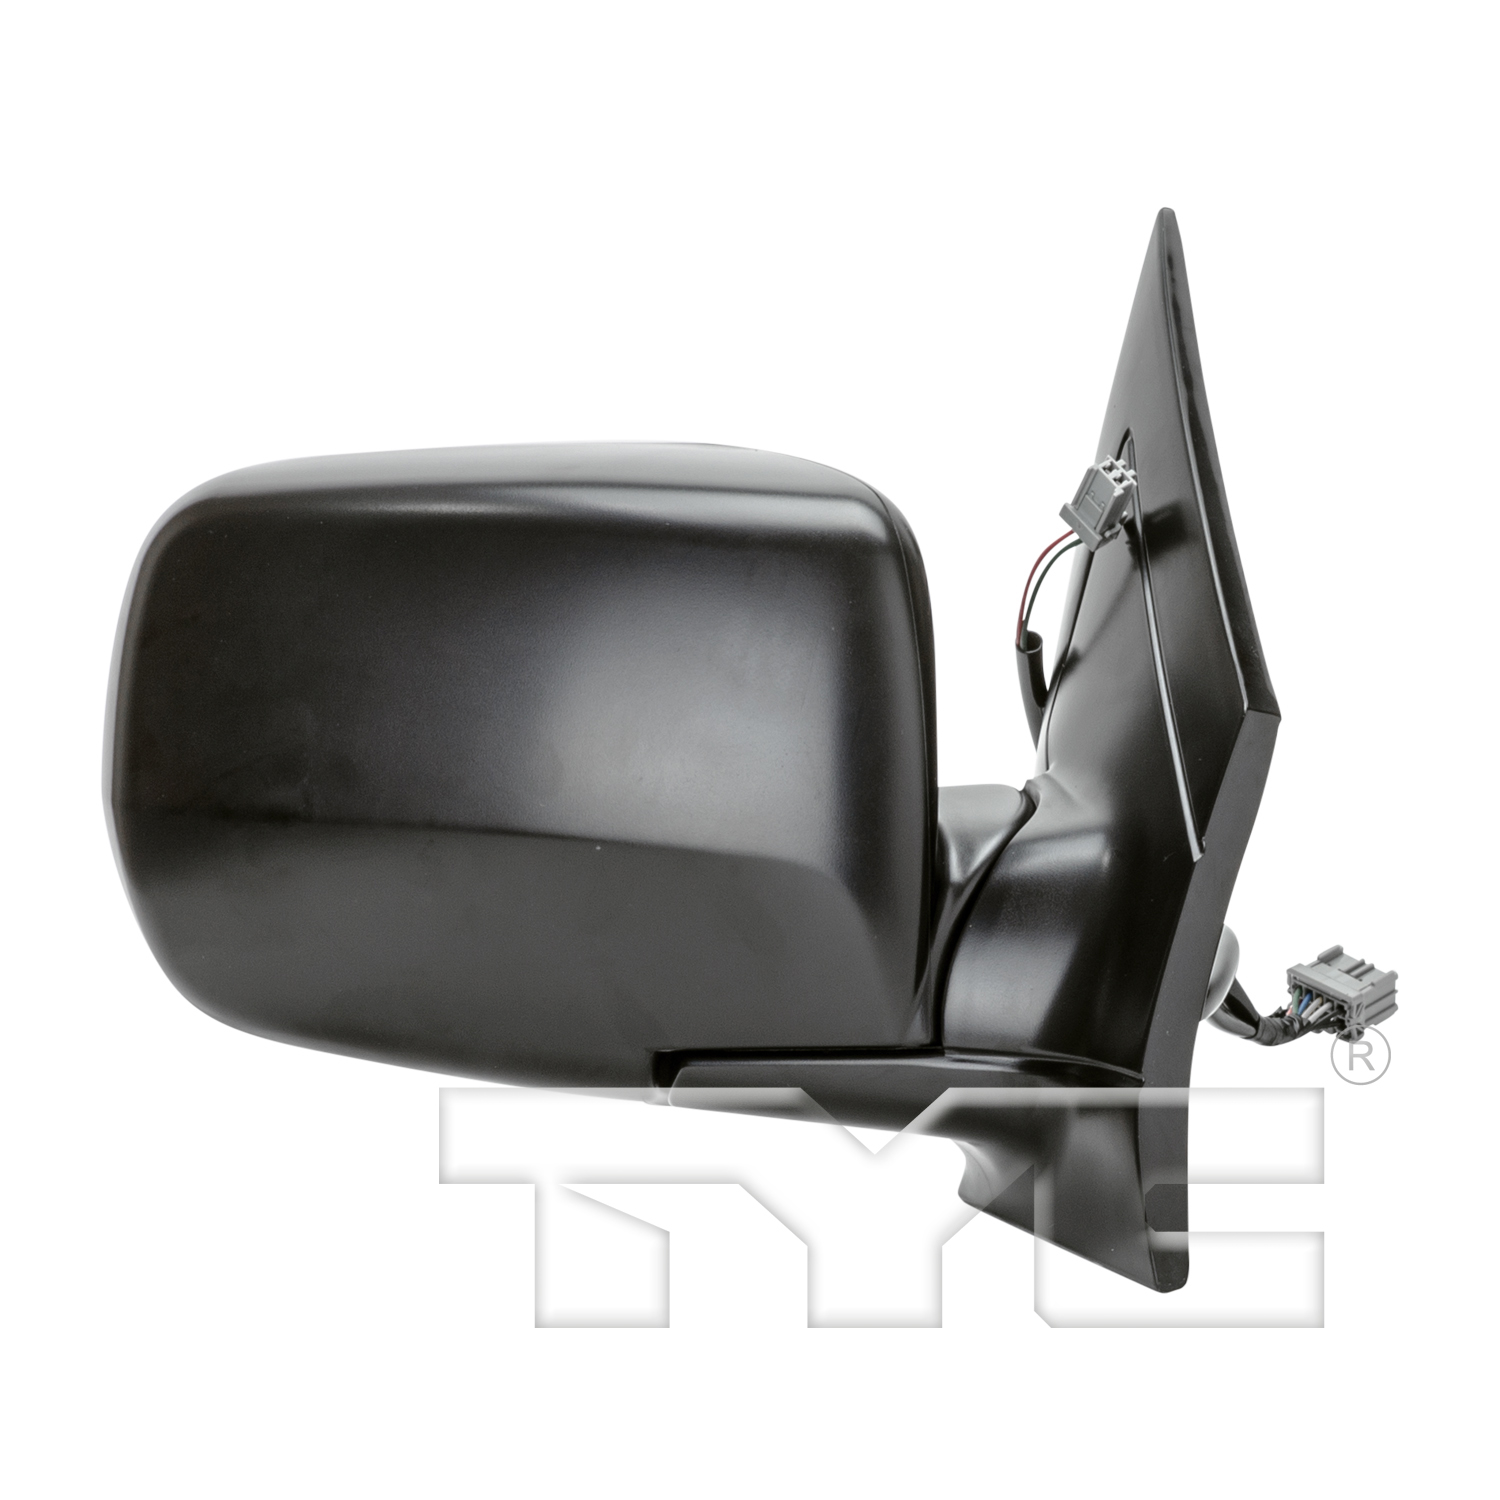 Aftermarket MIRRORS for ACURA - MDX, MDX,02-06,RT Mirror outside rear view